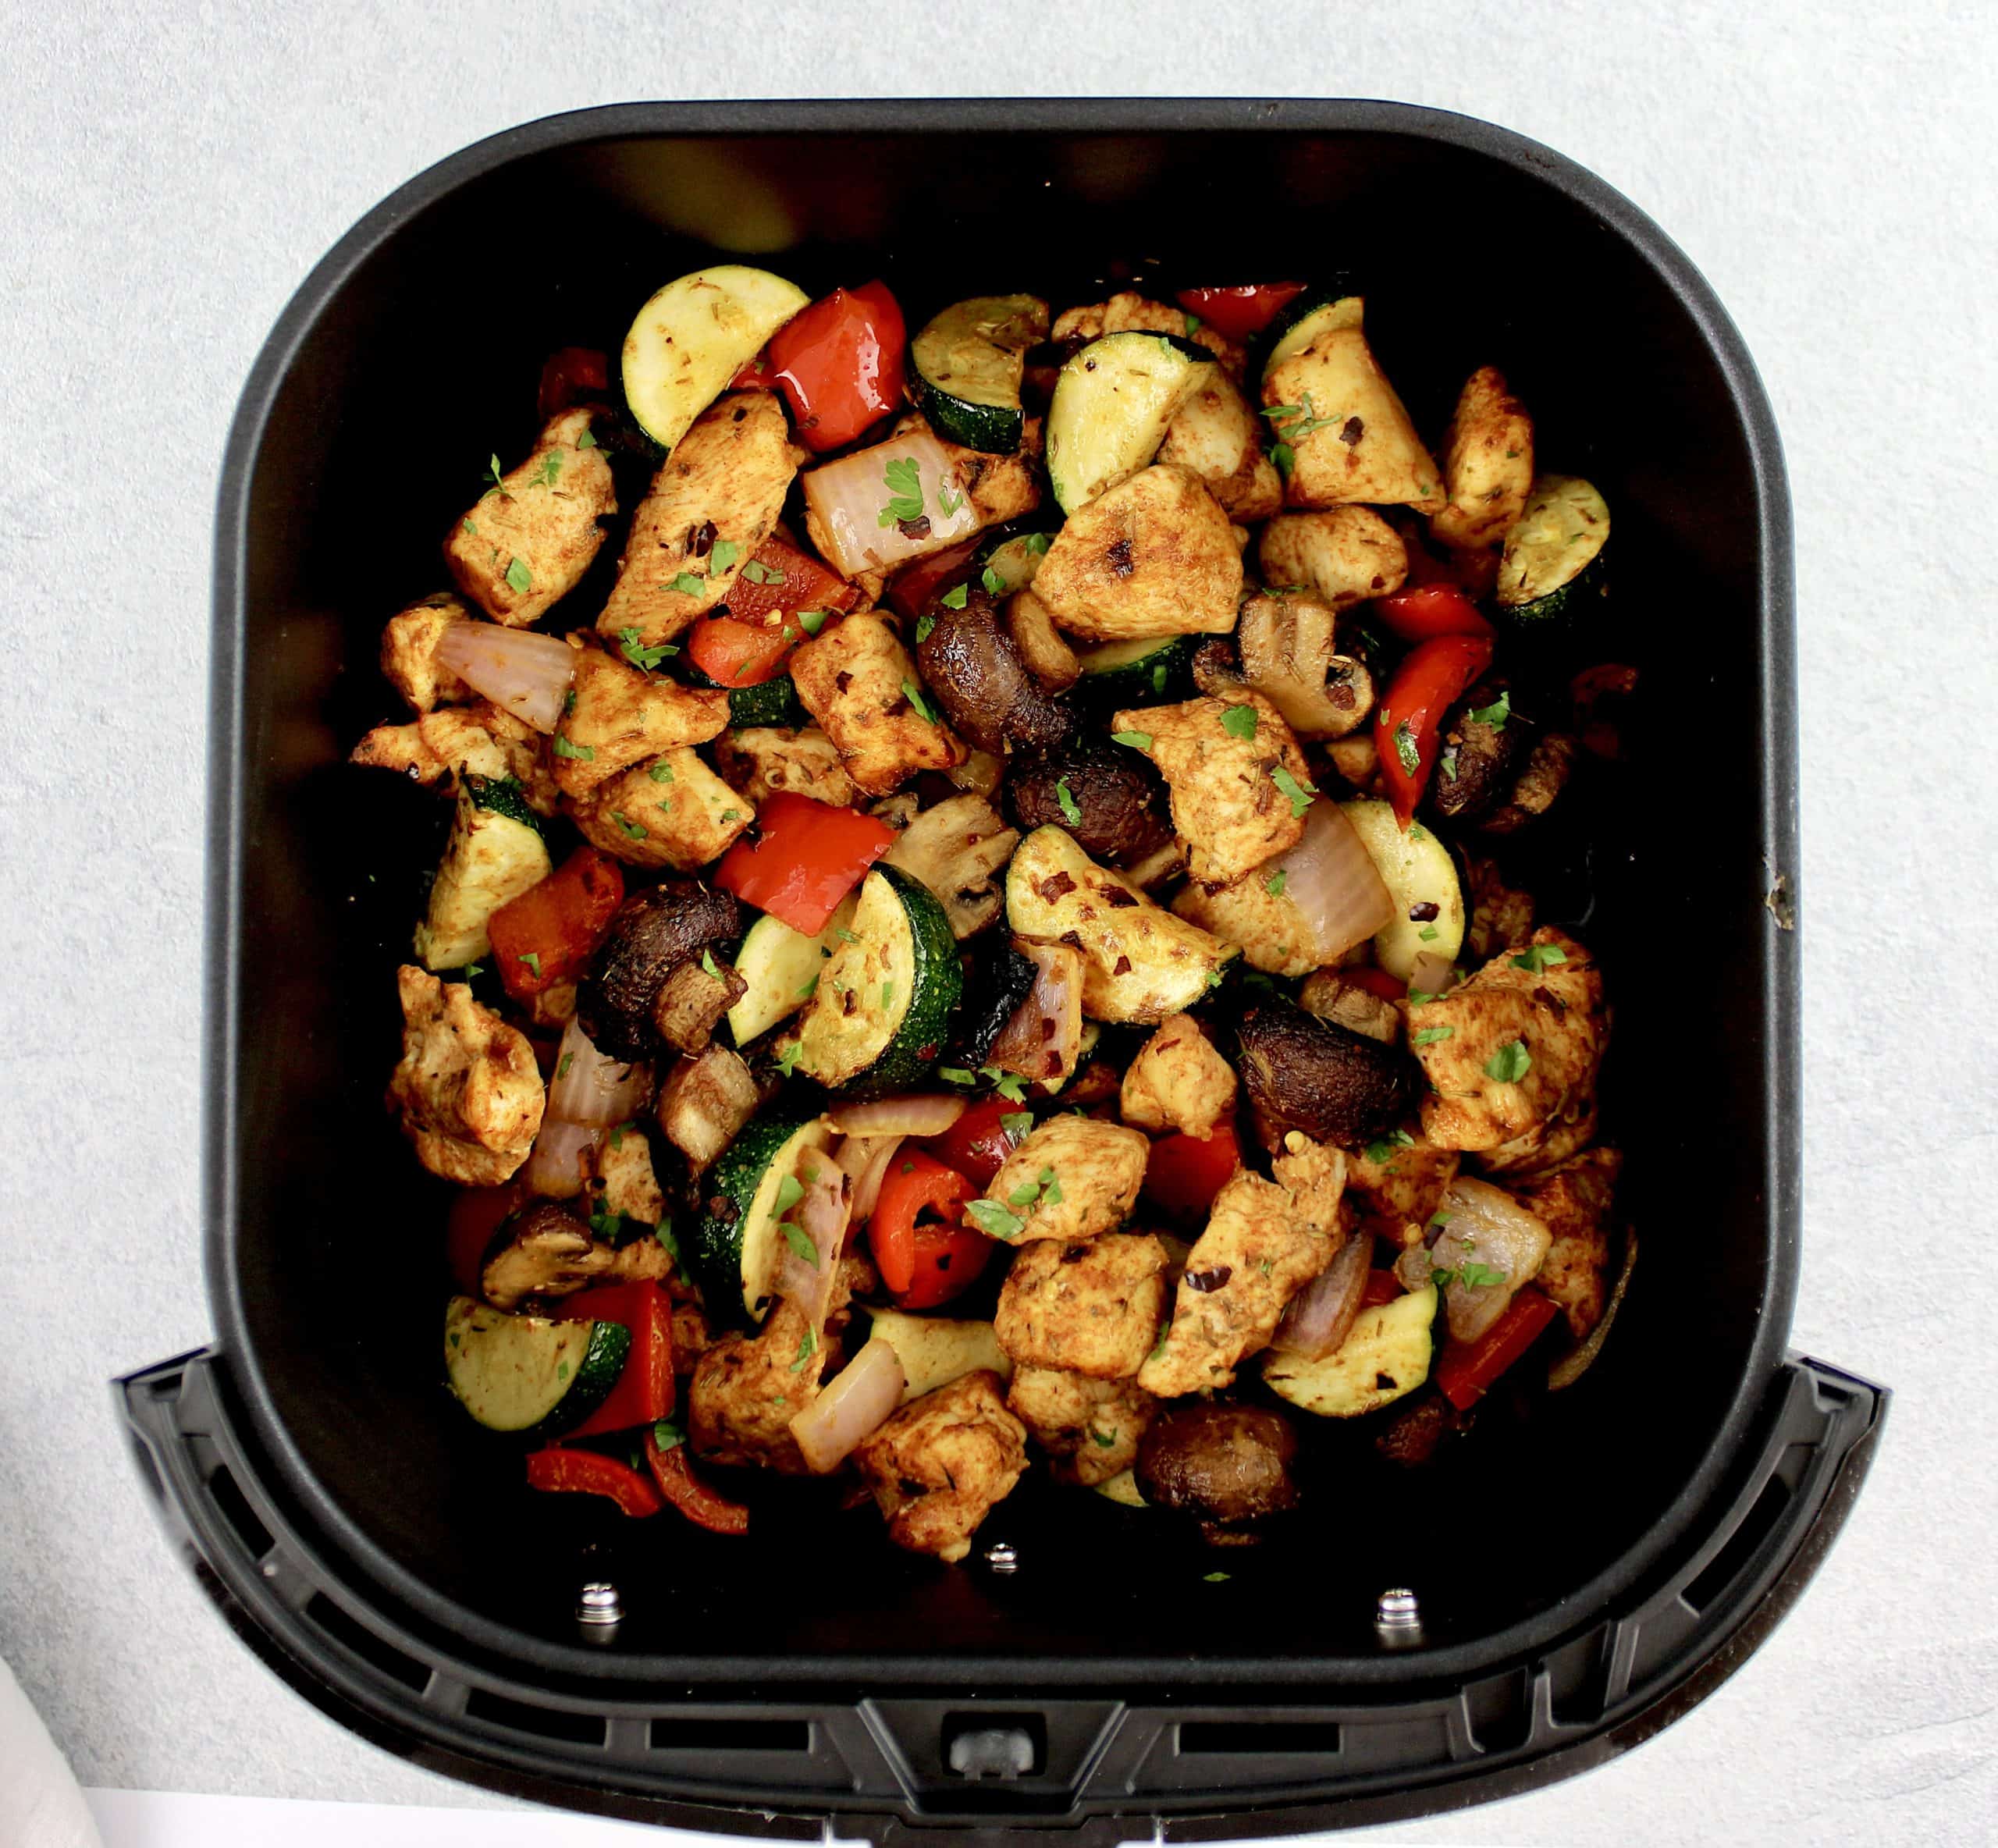 chopped chicken and veggies with spices in air fryer basket cooked